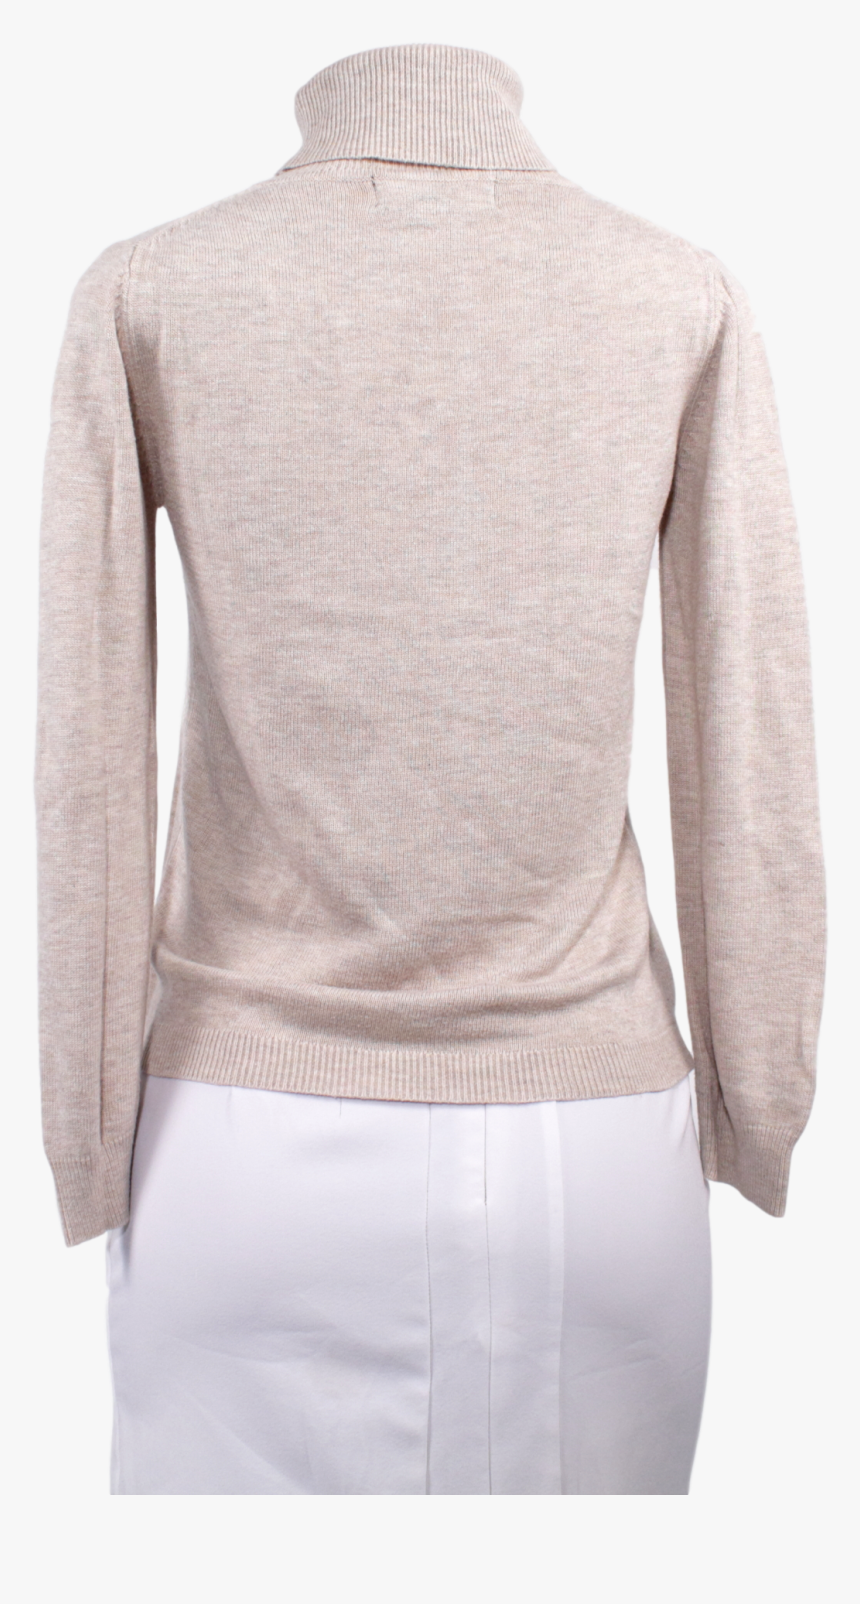 Forever 21 Turtleneck Sweater - Cardigan, HD Png Download, Free Download